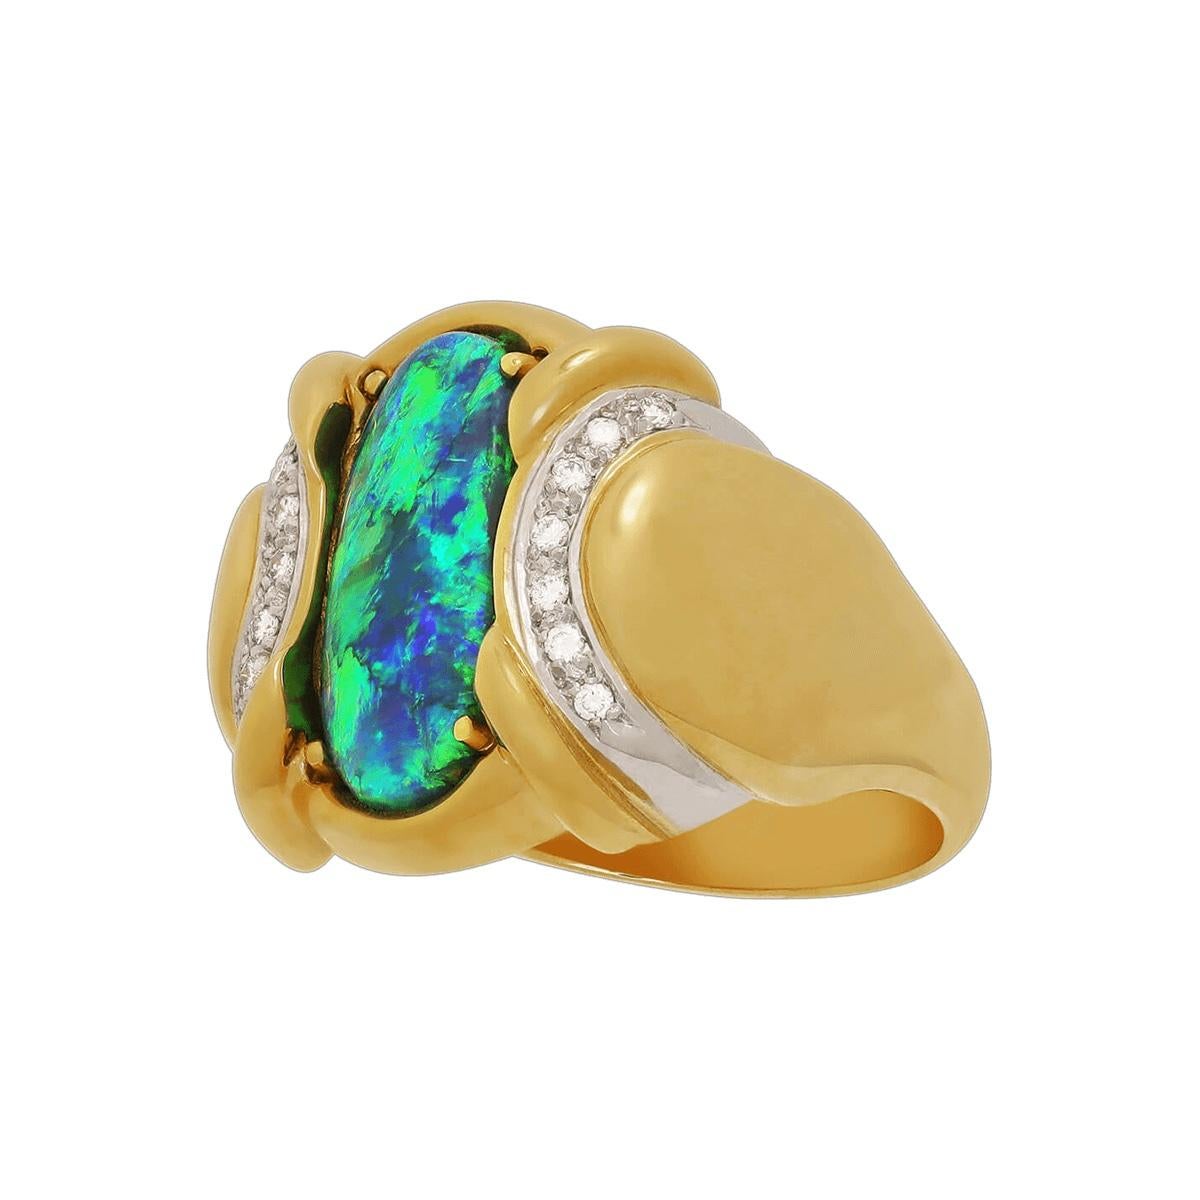 An amazing bright green black opal with a sparkling blue, what a stunning stone. It shows a bright and clean colour from any angle you view. Set in solid 18K gold and platinum, accented with high jewellery grade diamonds, it's a unique and classy